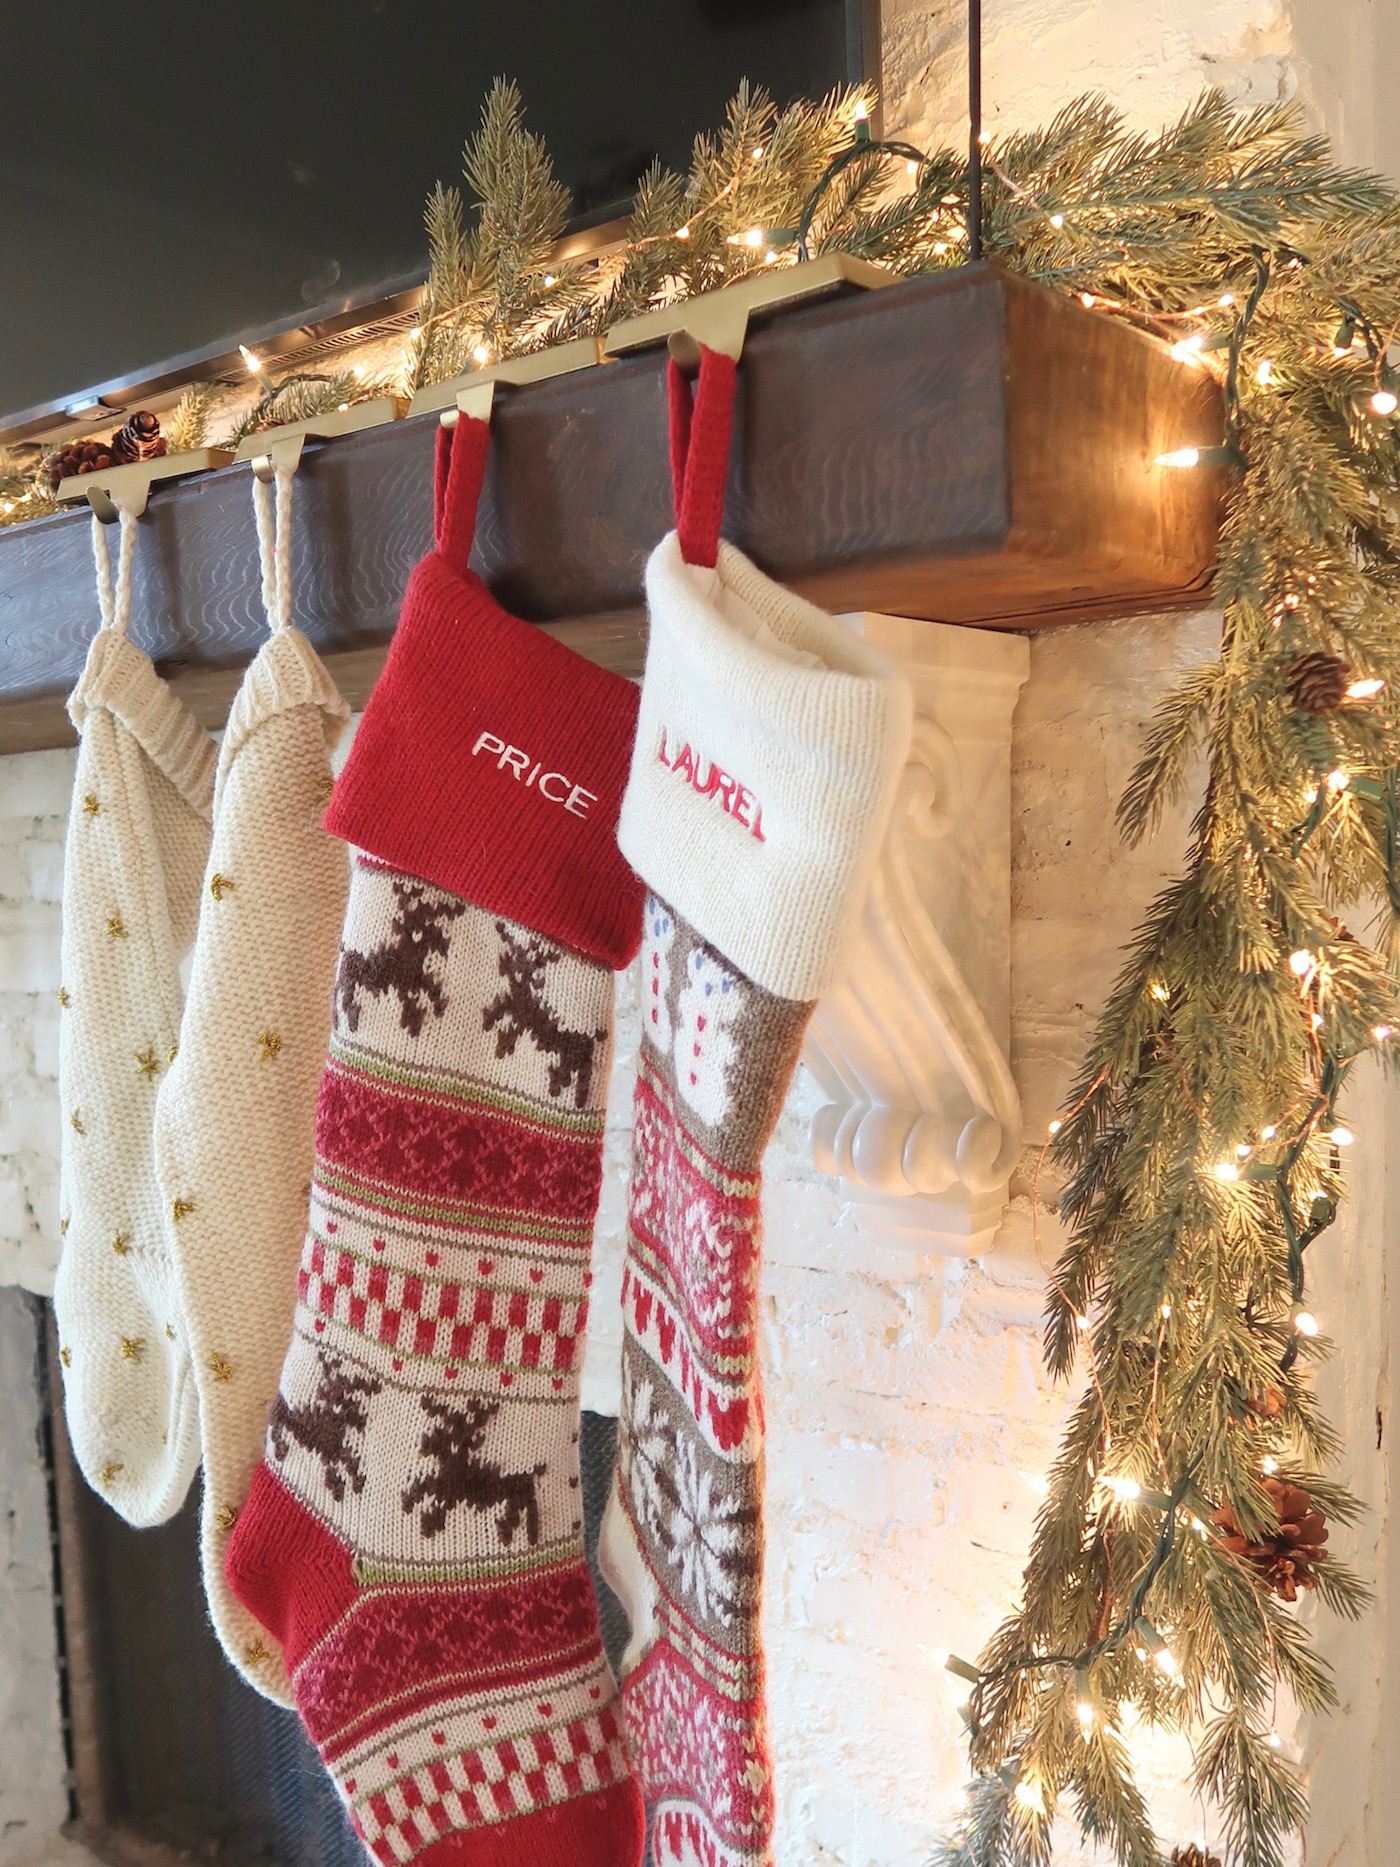 Stockings are hung by the chimney with care!